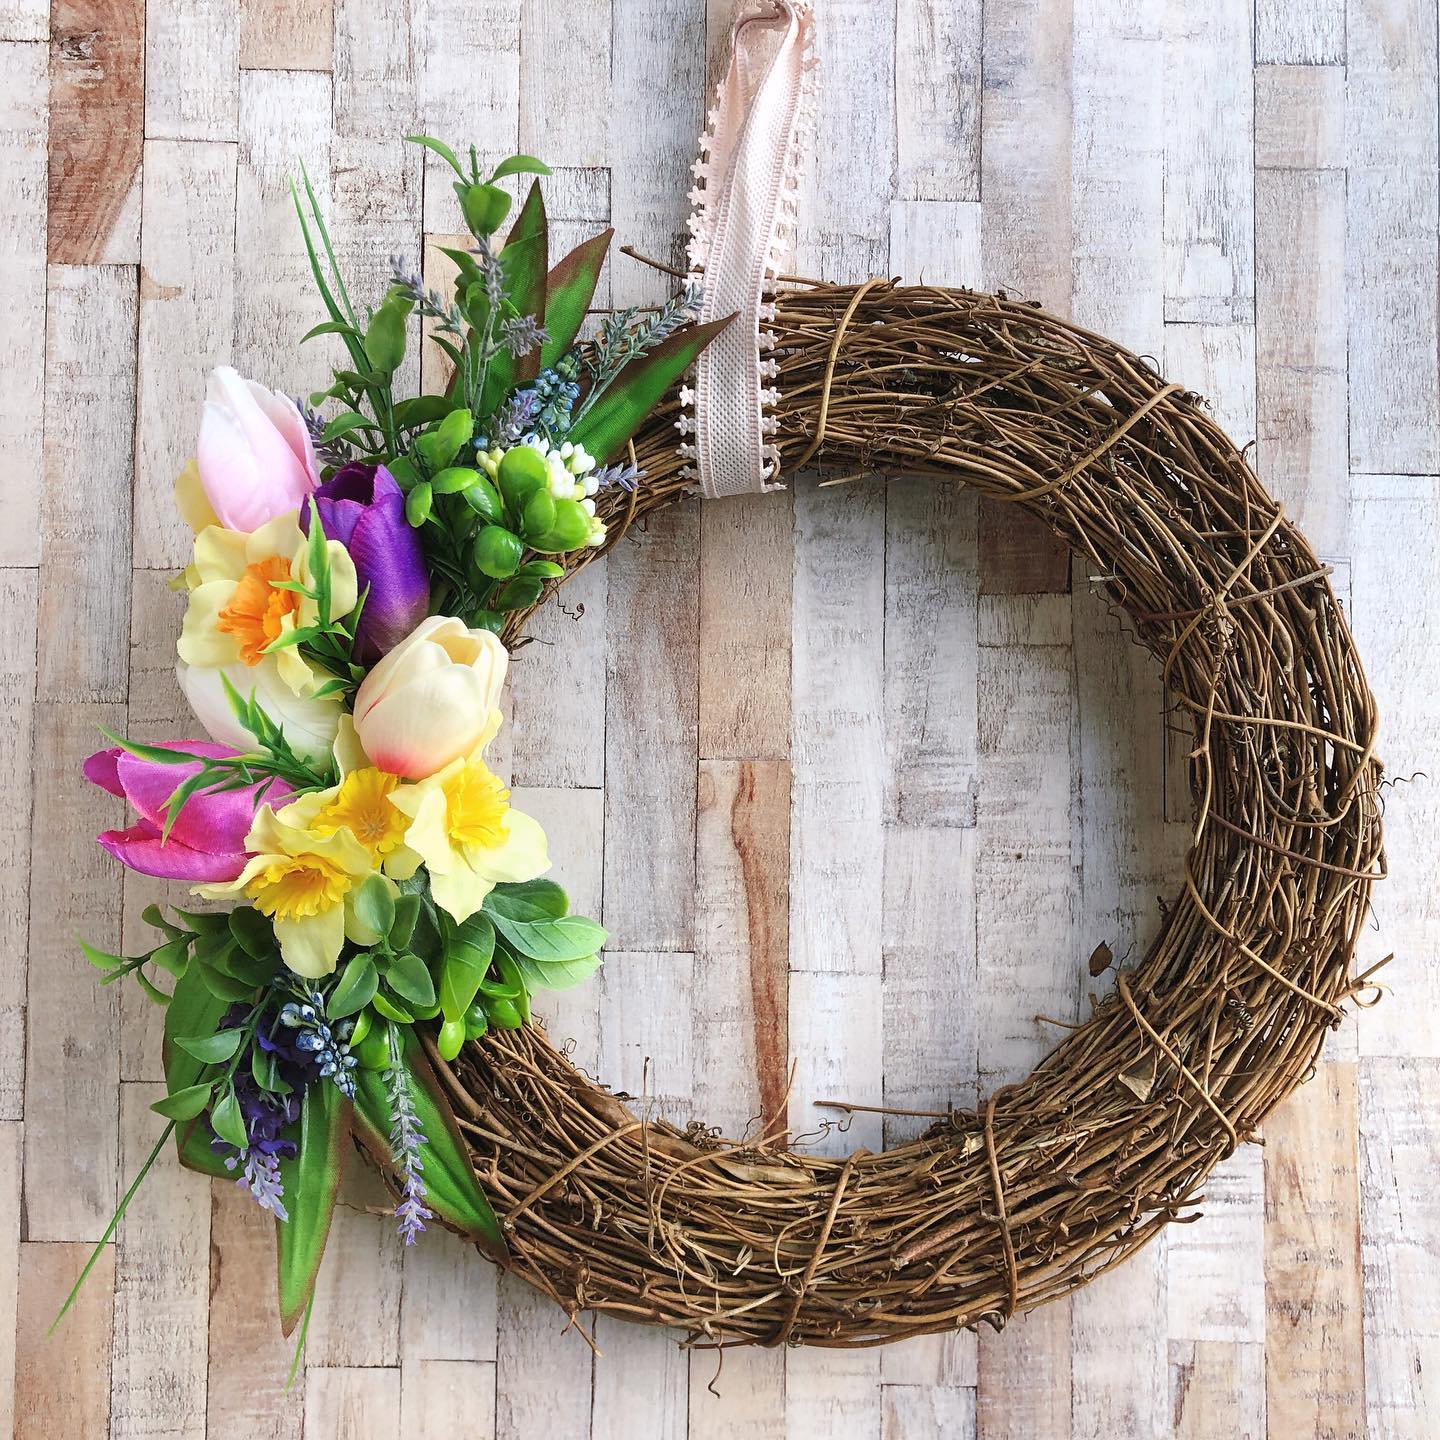 Ready for Spring? How about some spring door decor? Swipe to see the options - which would you choose? Let me know!